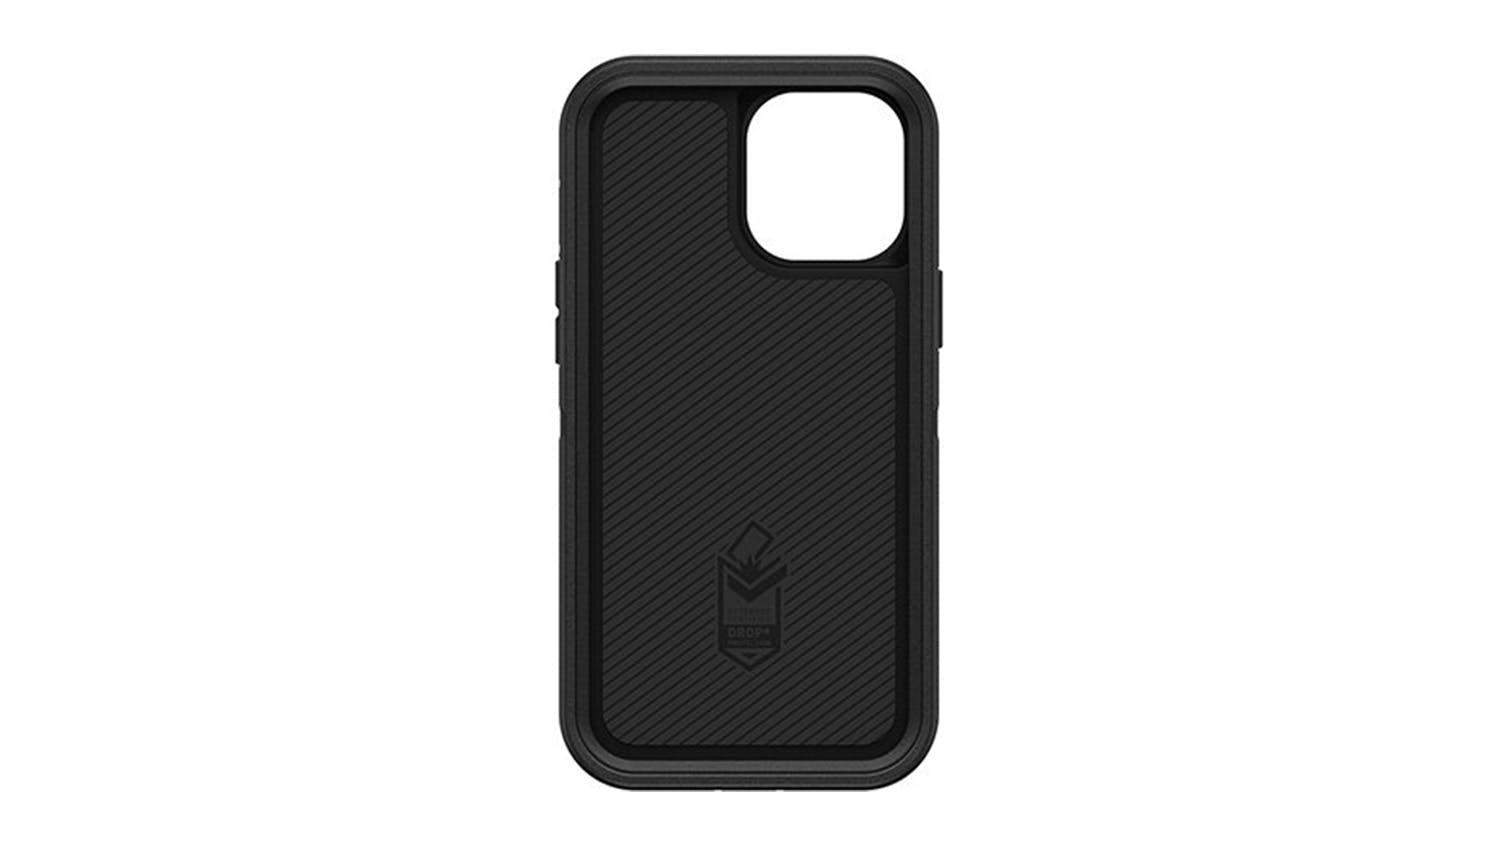 Otterbox Defender Case for iPhone 12 Pro Max - Black